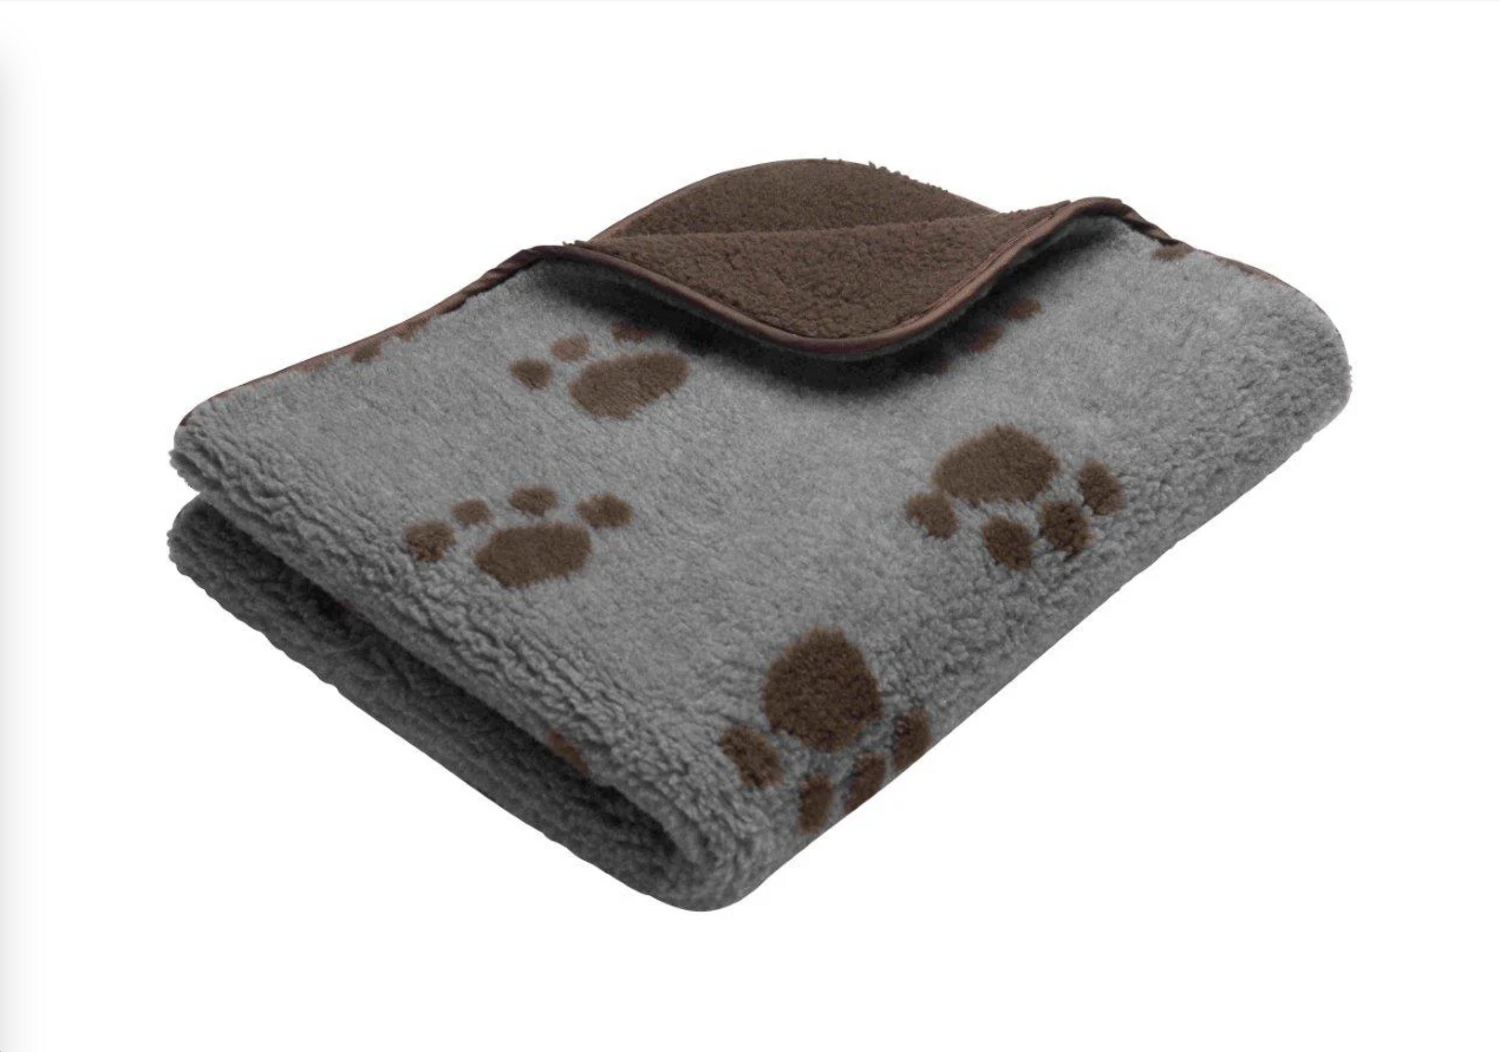 Petface Sherpa Printed Fleece Blanket for Dogs